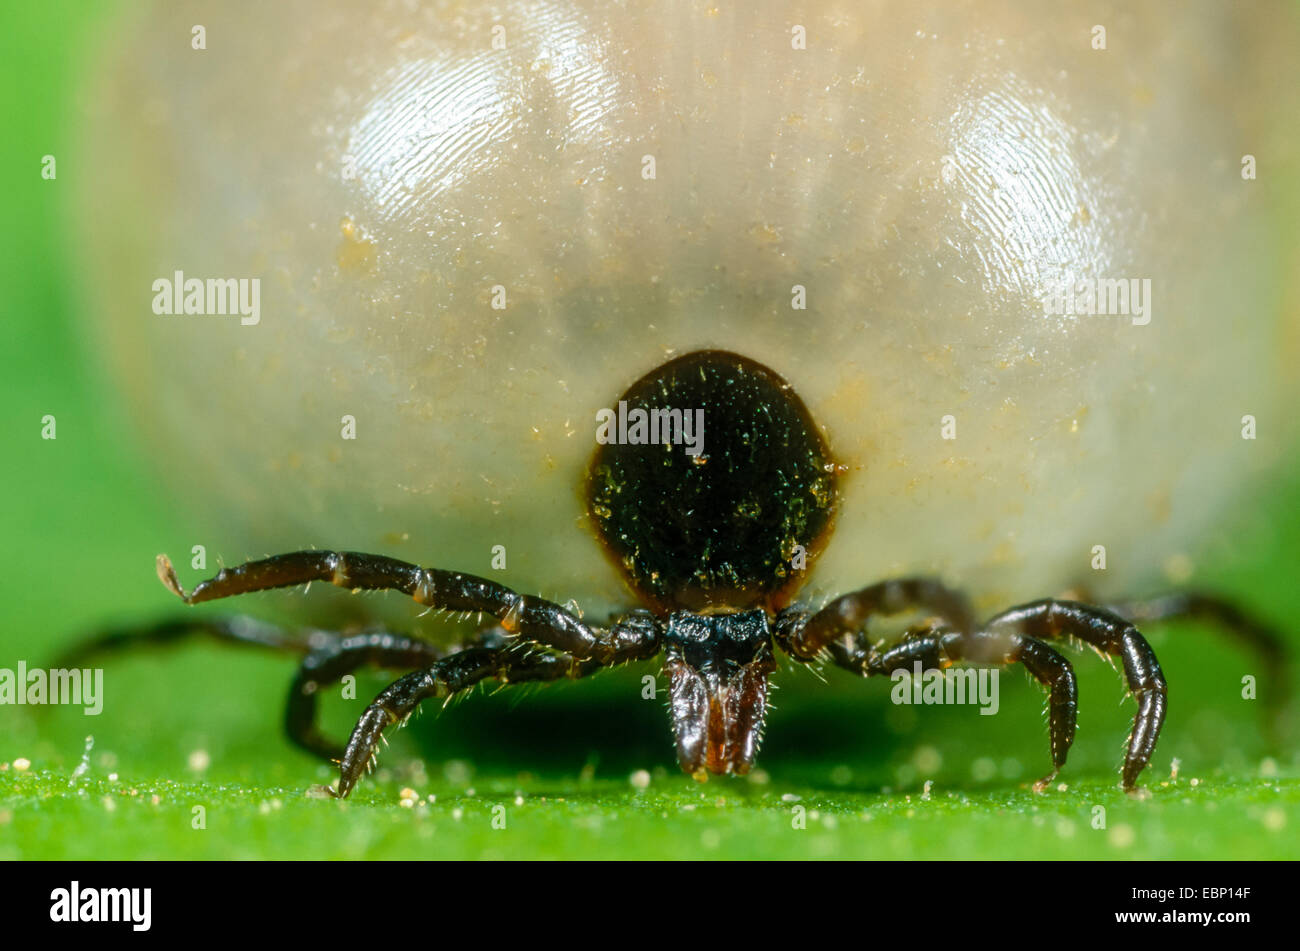 European castor bean tick, European sheep tick (Ixodes ricinus), fully sucked female on a leaf just before egg deposition, Germany Stock Photo